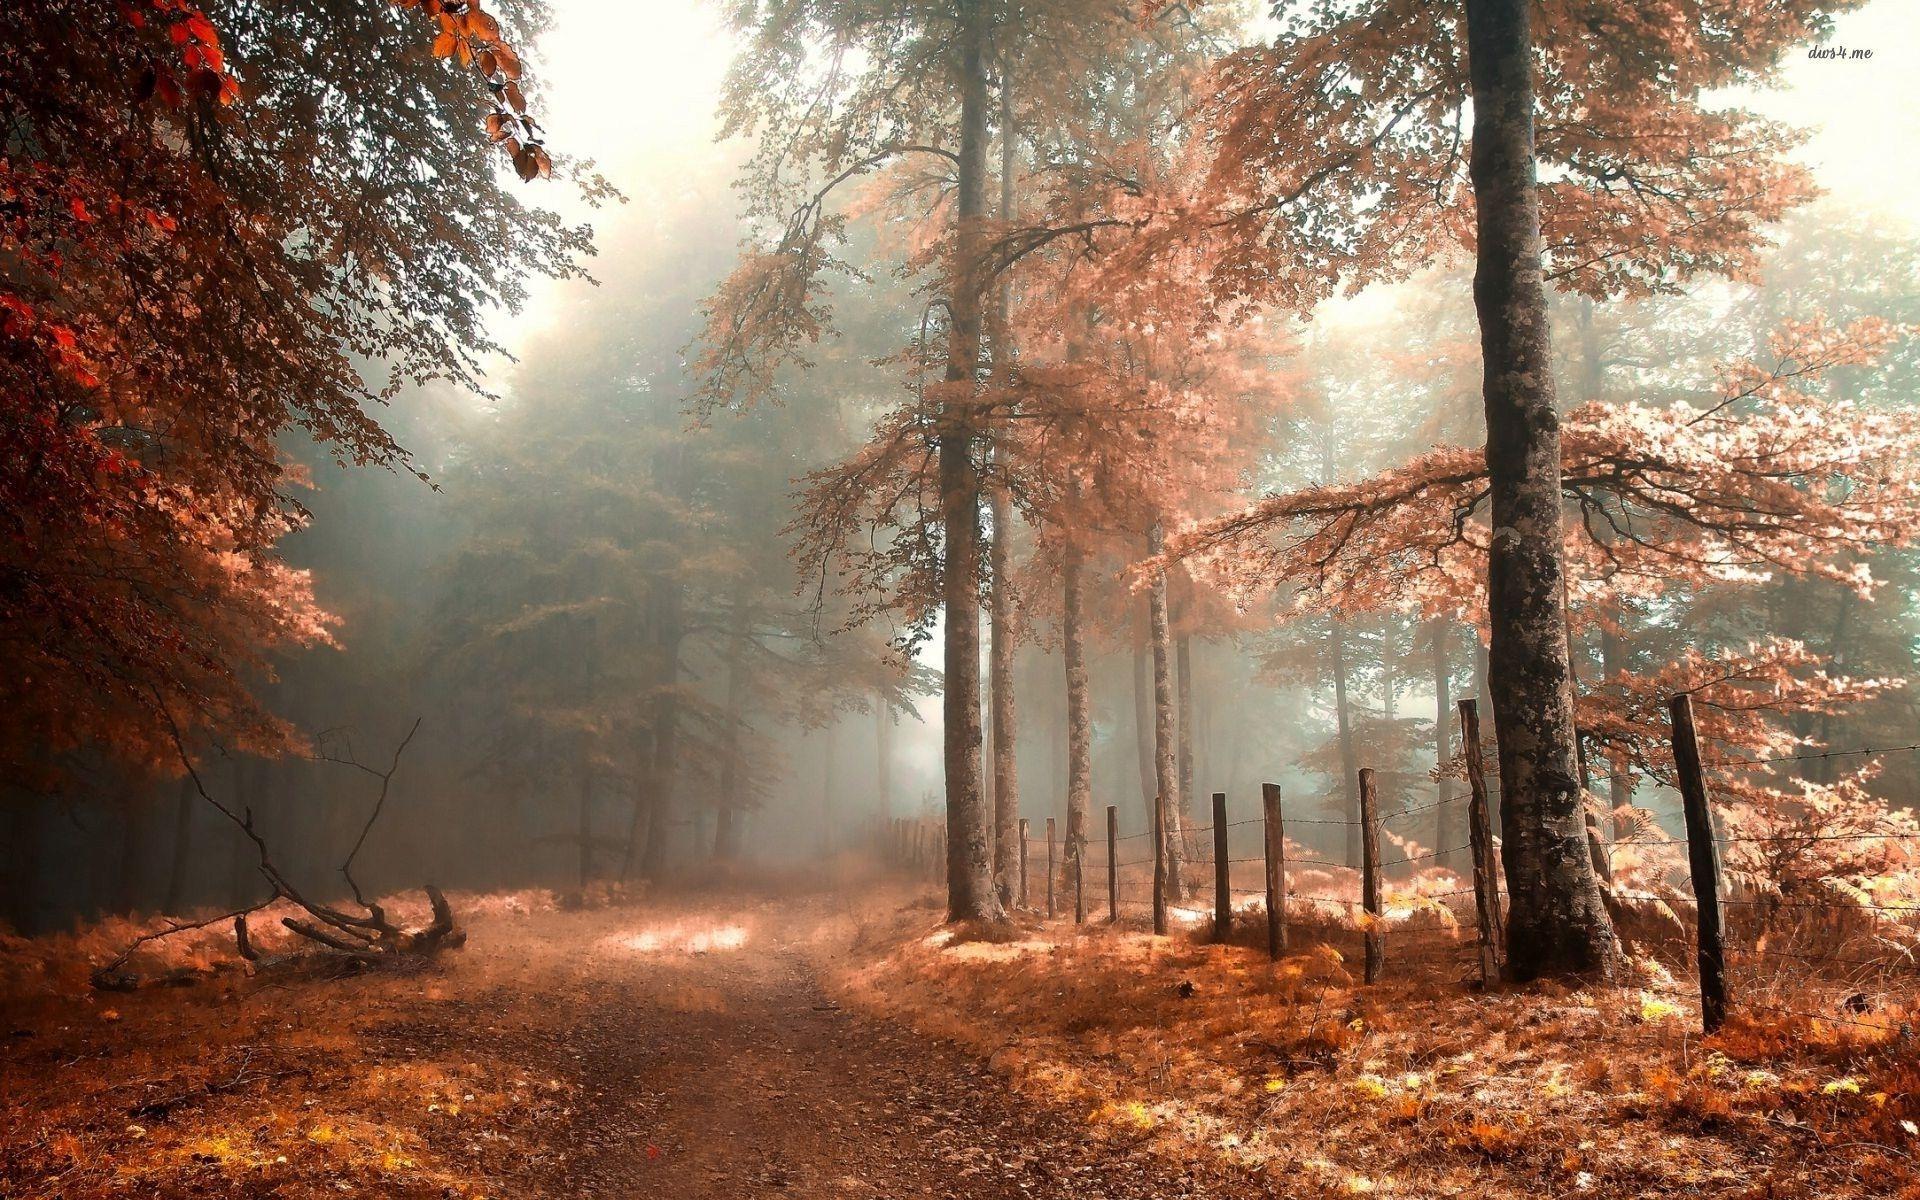 Sunlight in the forest wallpaper - Nature wallpapers - #33369 - Fall, fog